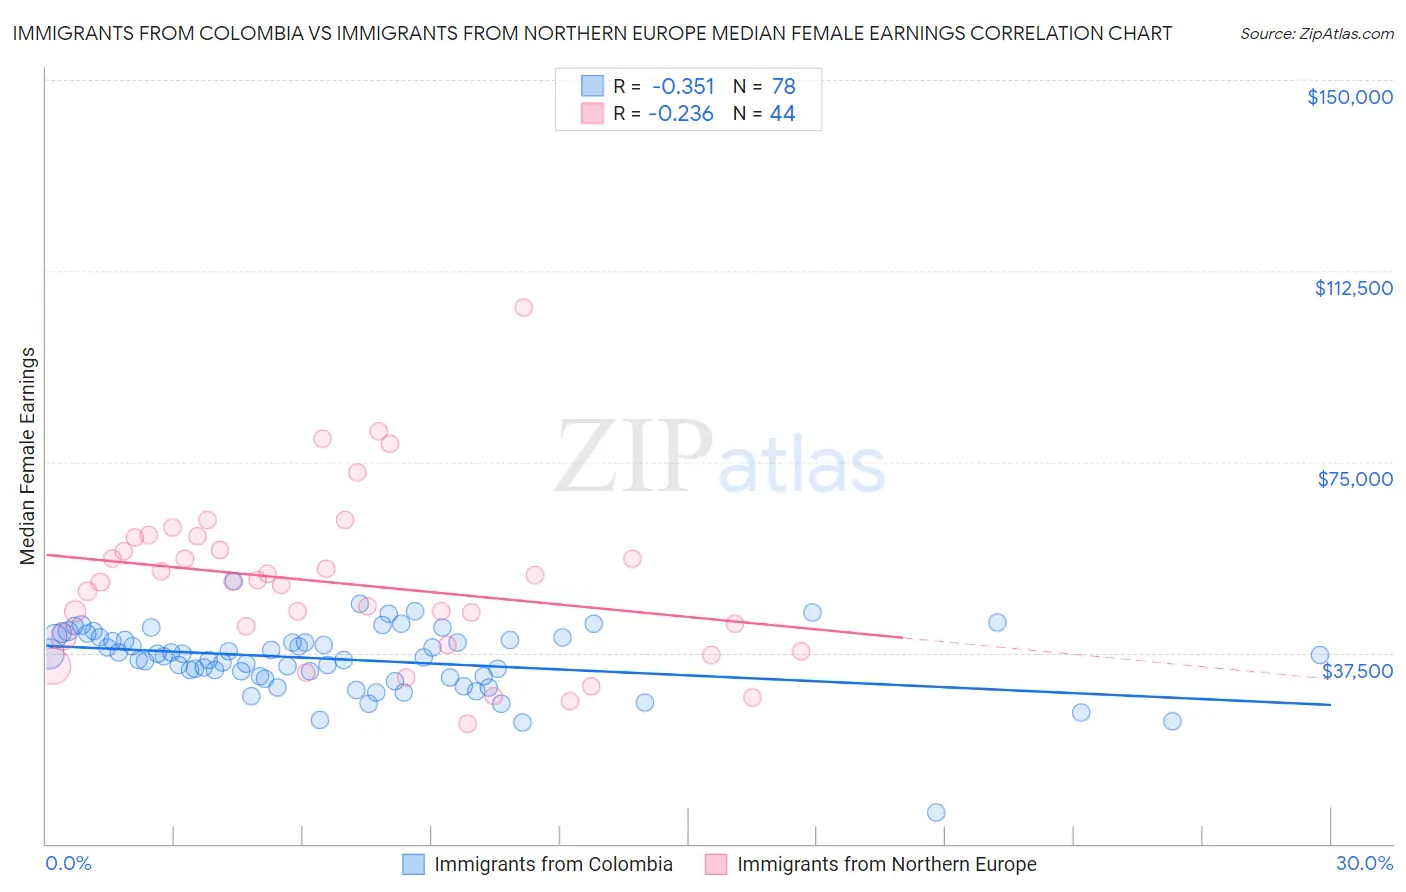 Immigrants from Colombia vs Immigrants from Northern Europe Median Female Earnings